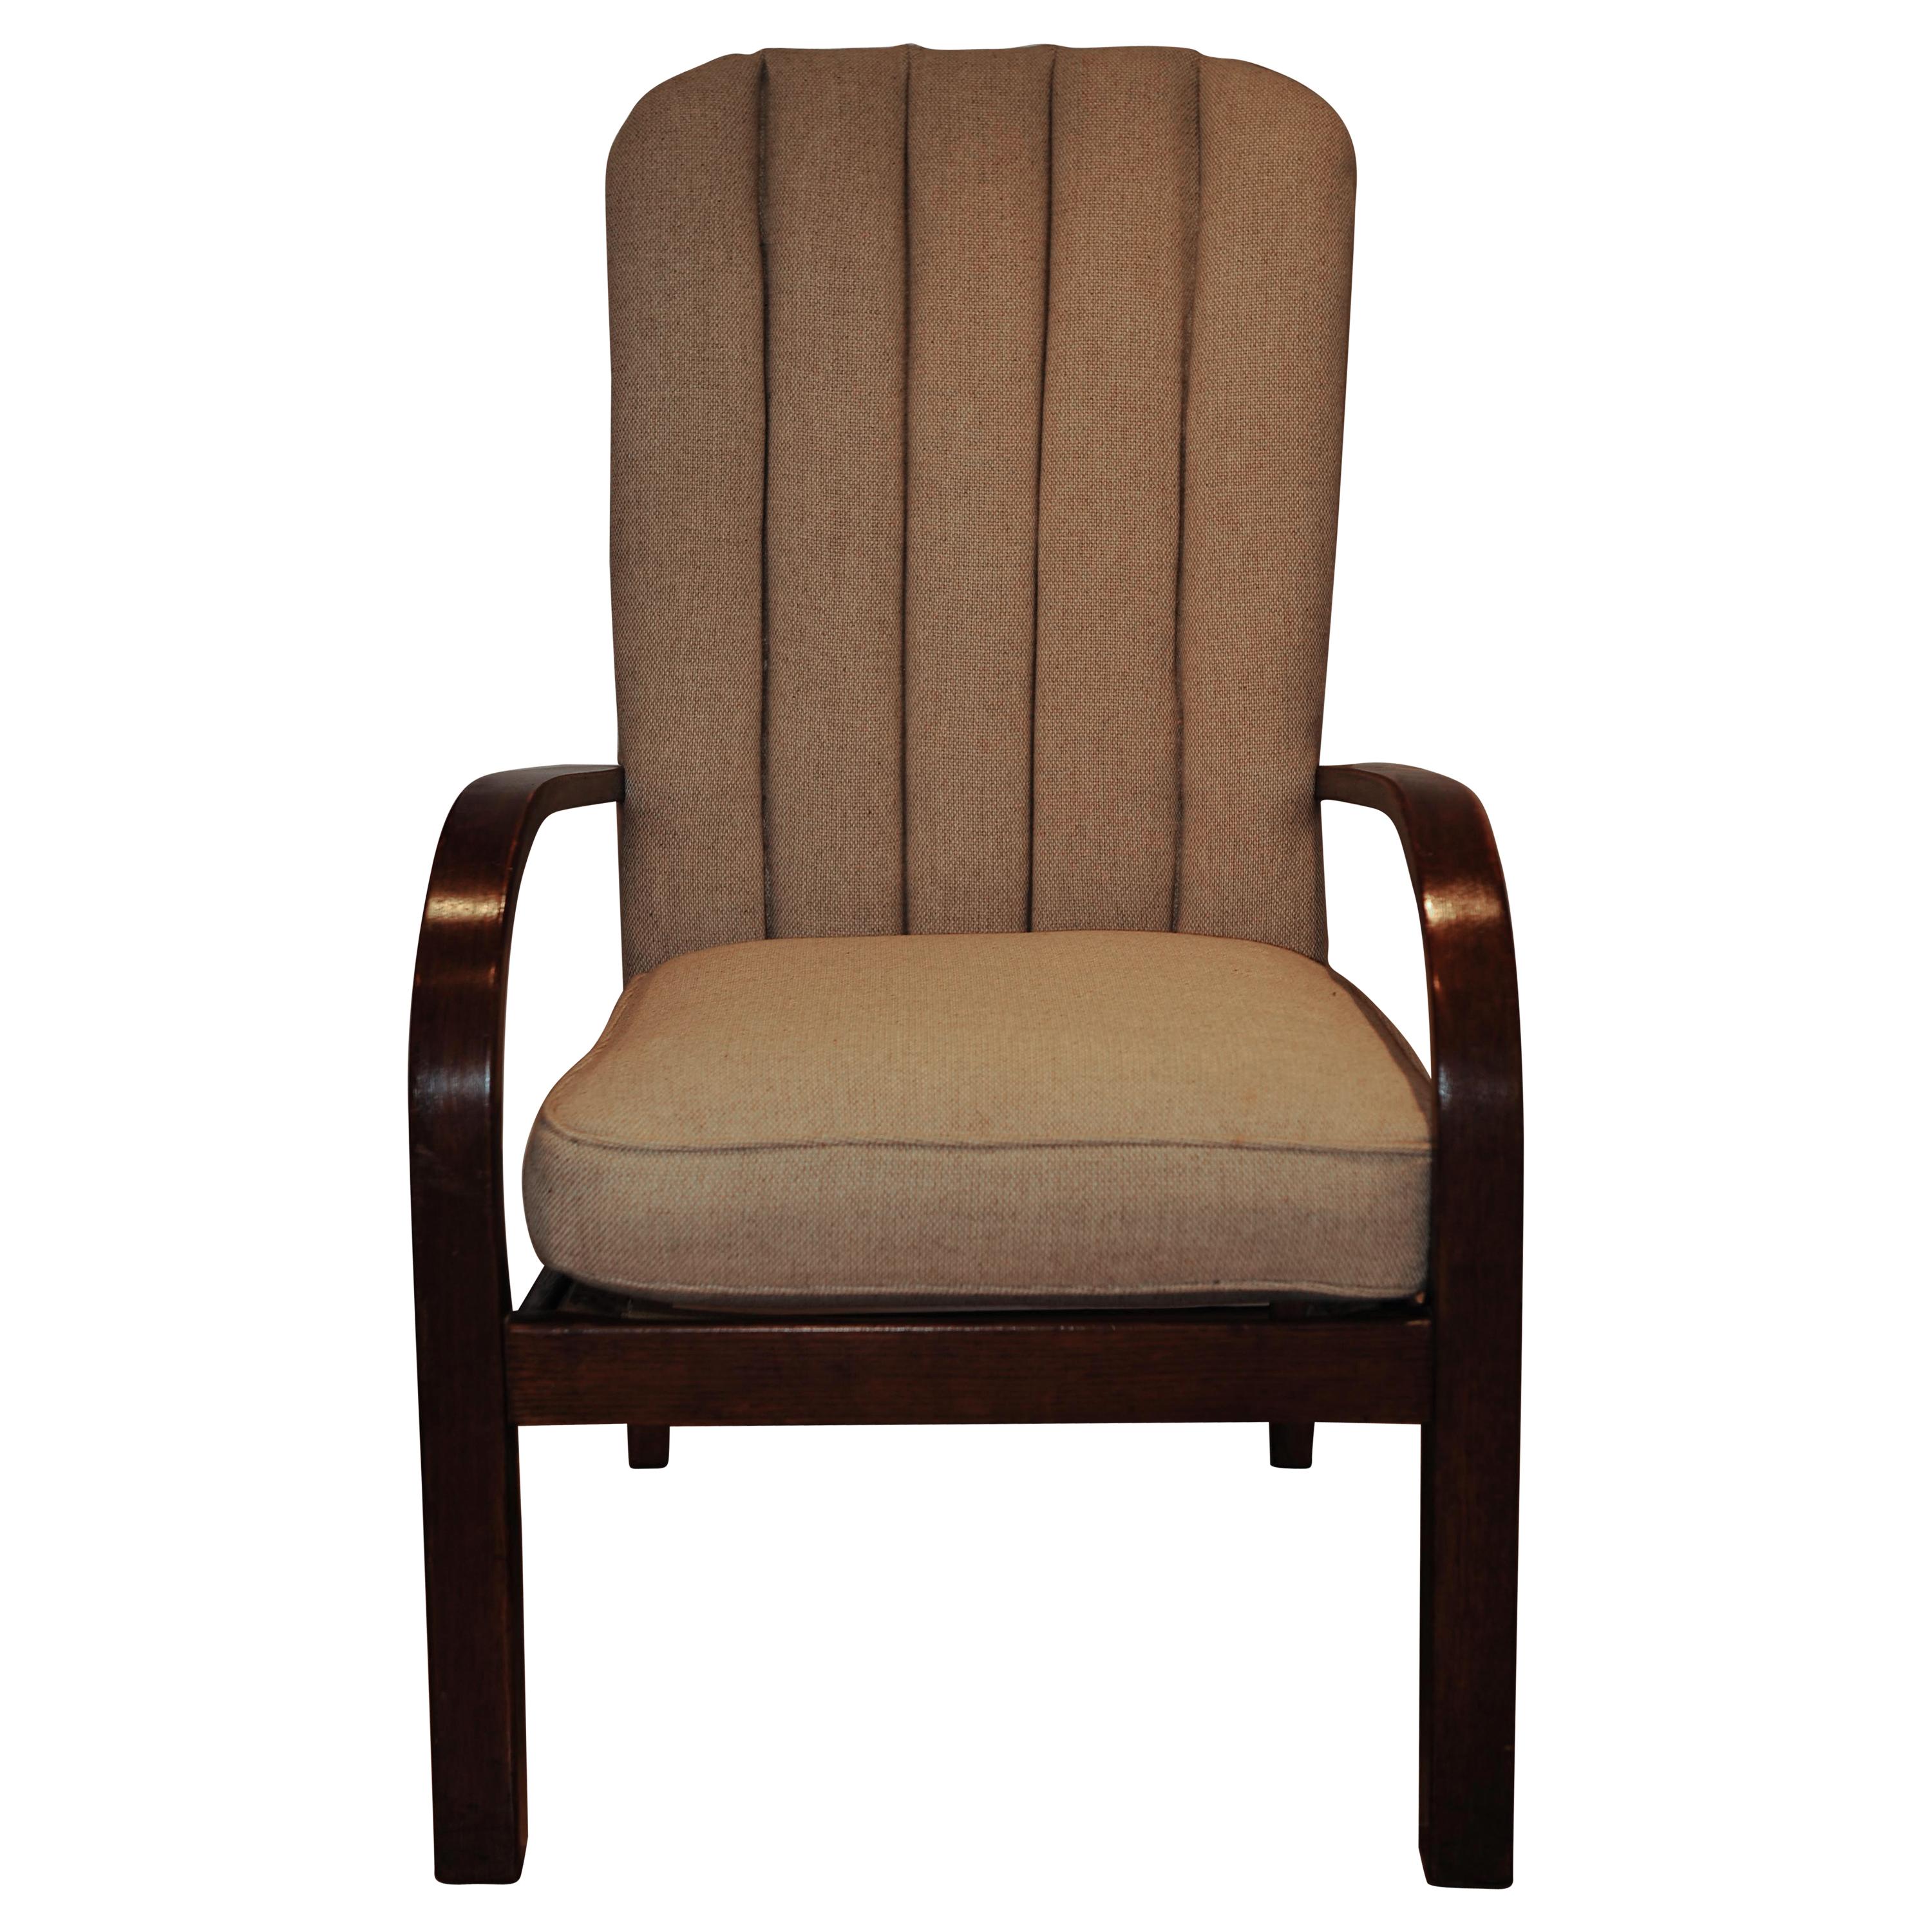 1930's Art Deco Oak Upholstered Lounge Chair by Parker Knoll.